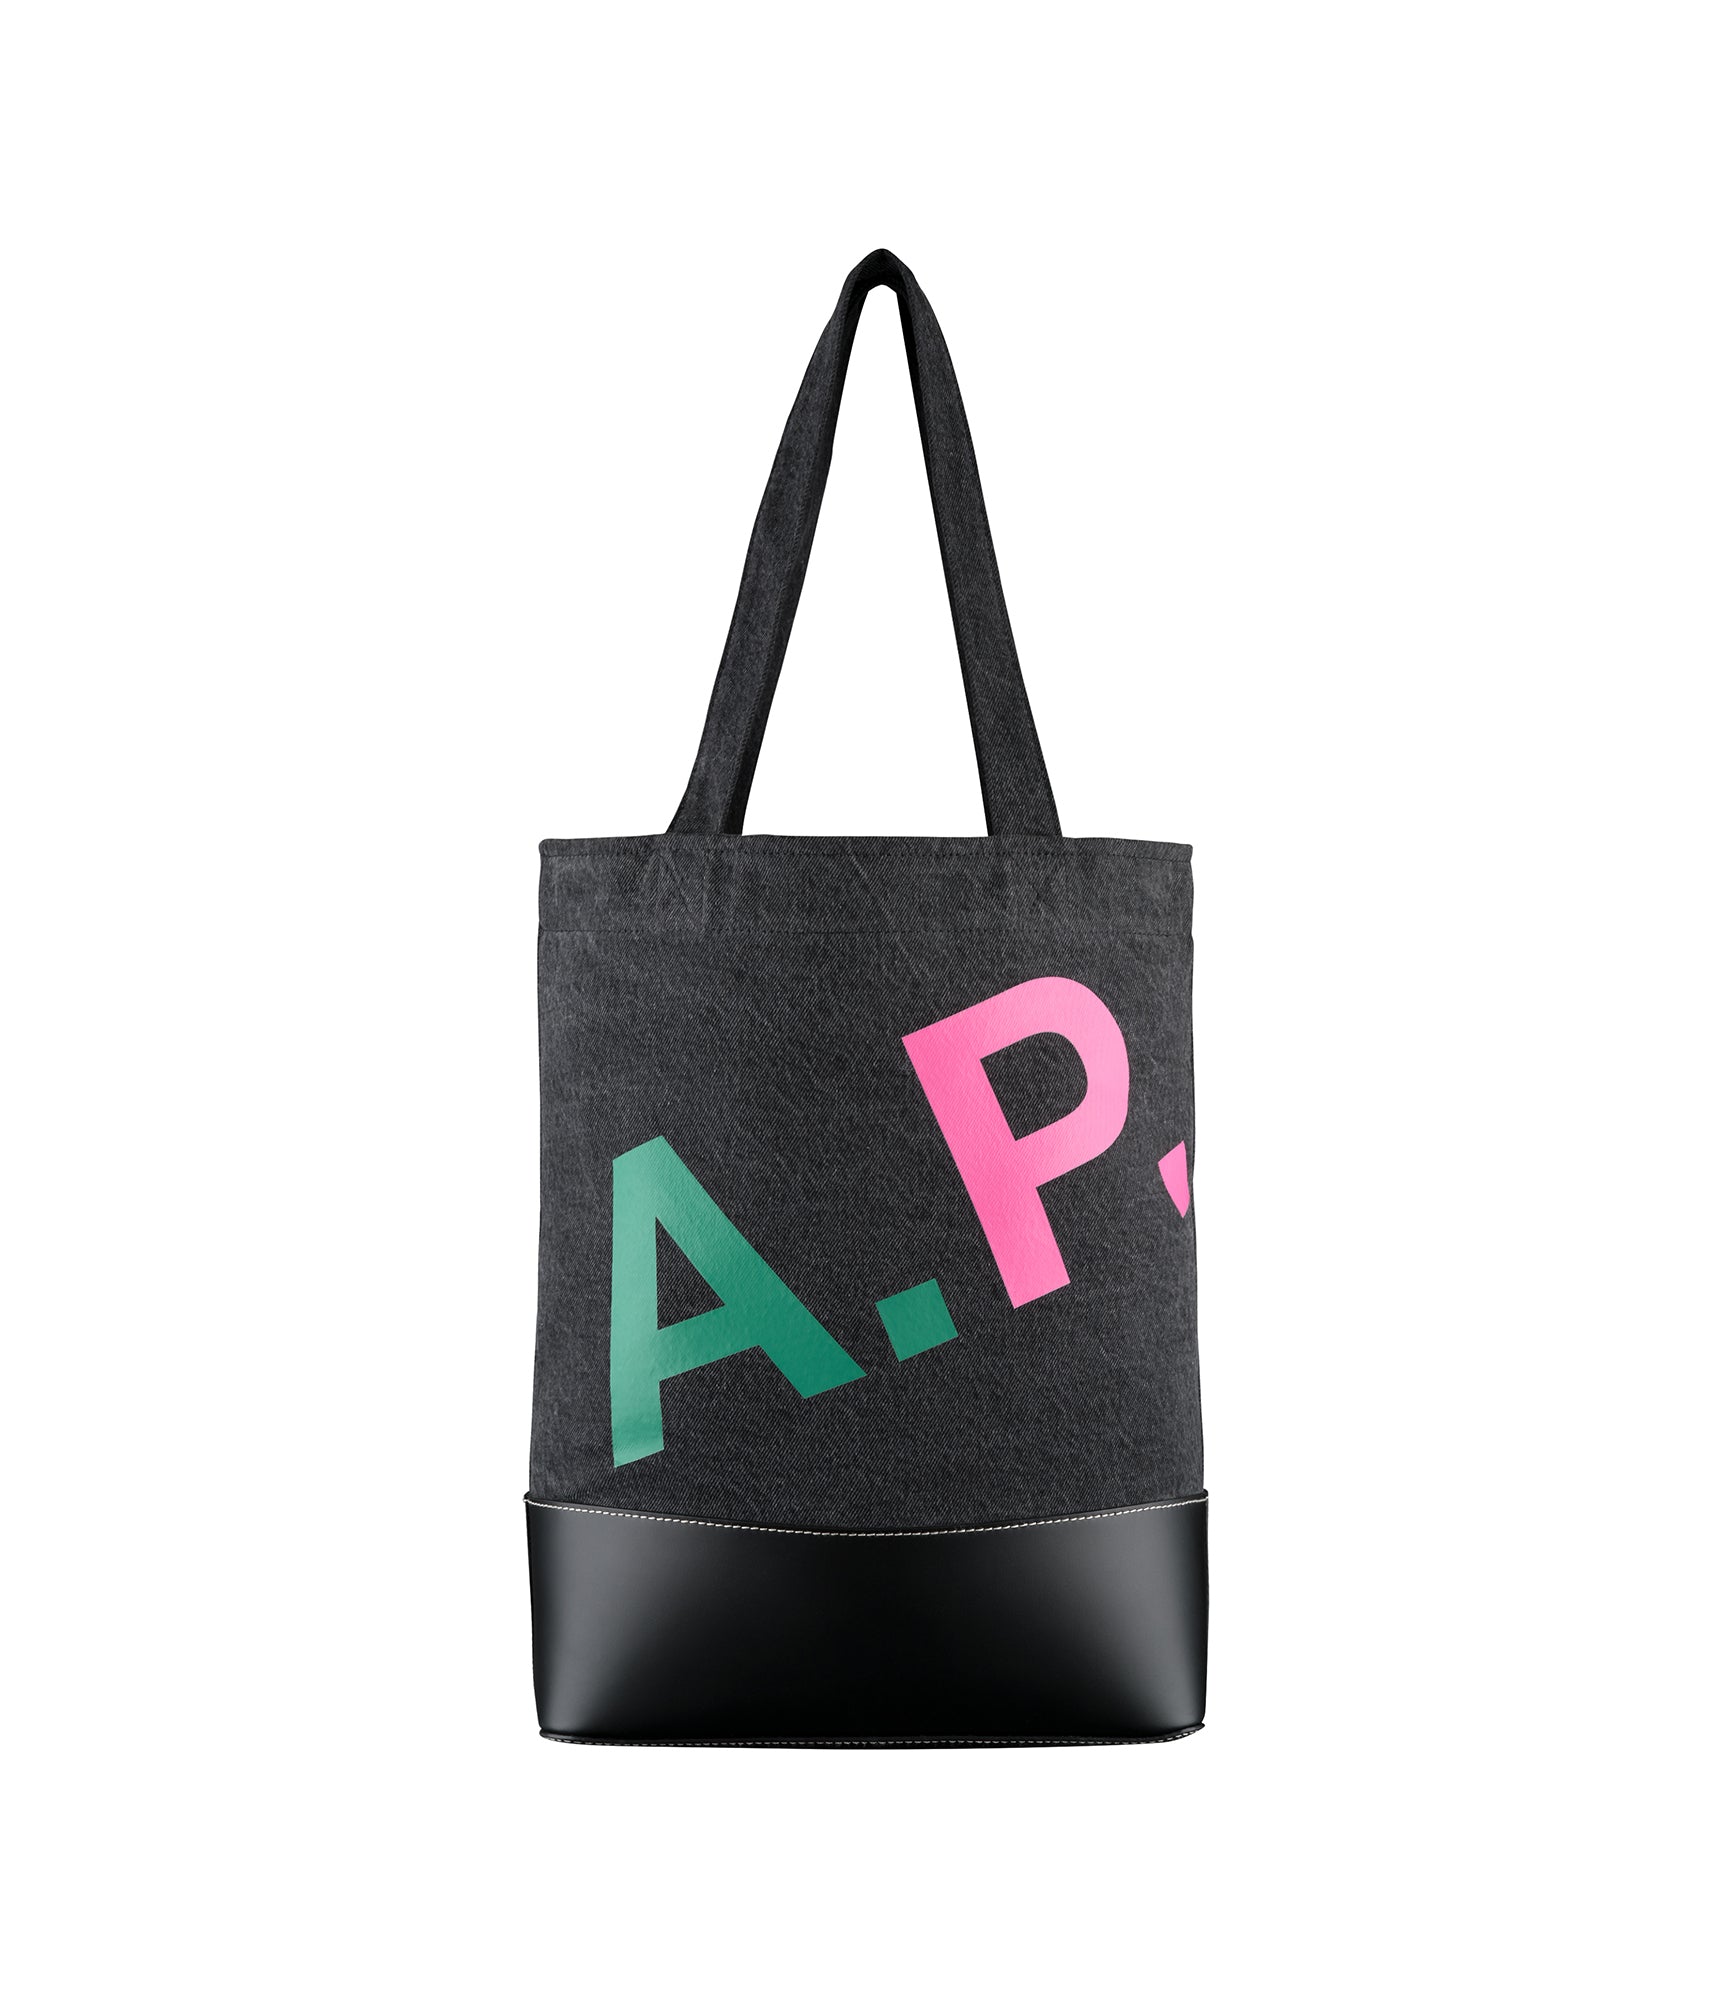 Axelle tote bag | Black stonewashed recycled denim and smooth leather |  A.P.C. Accessories